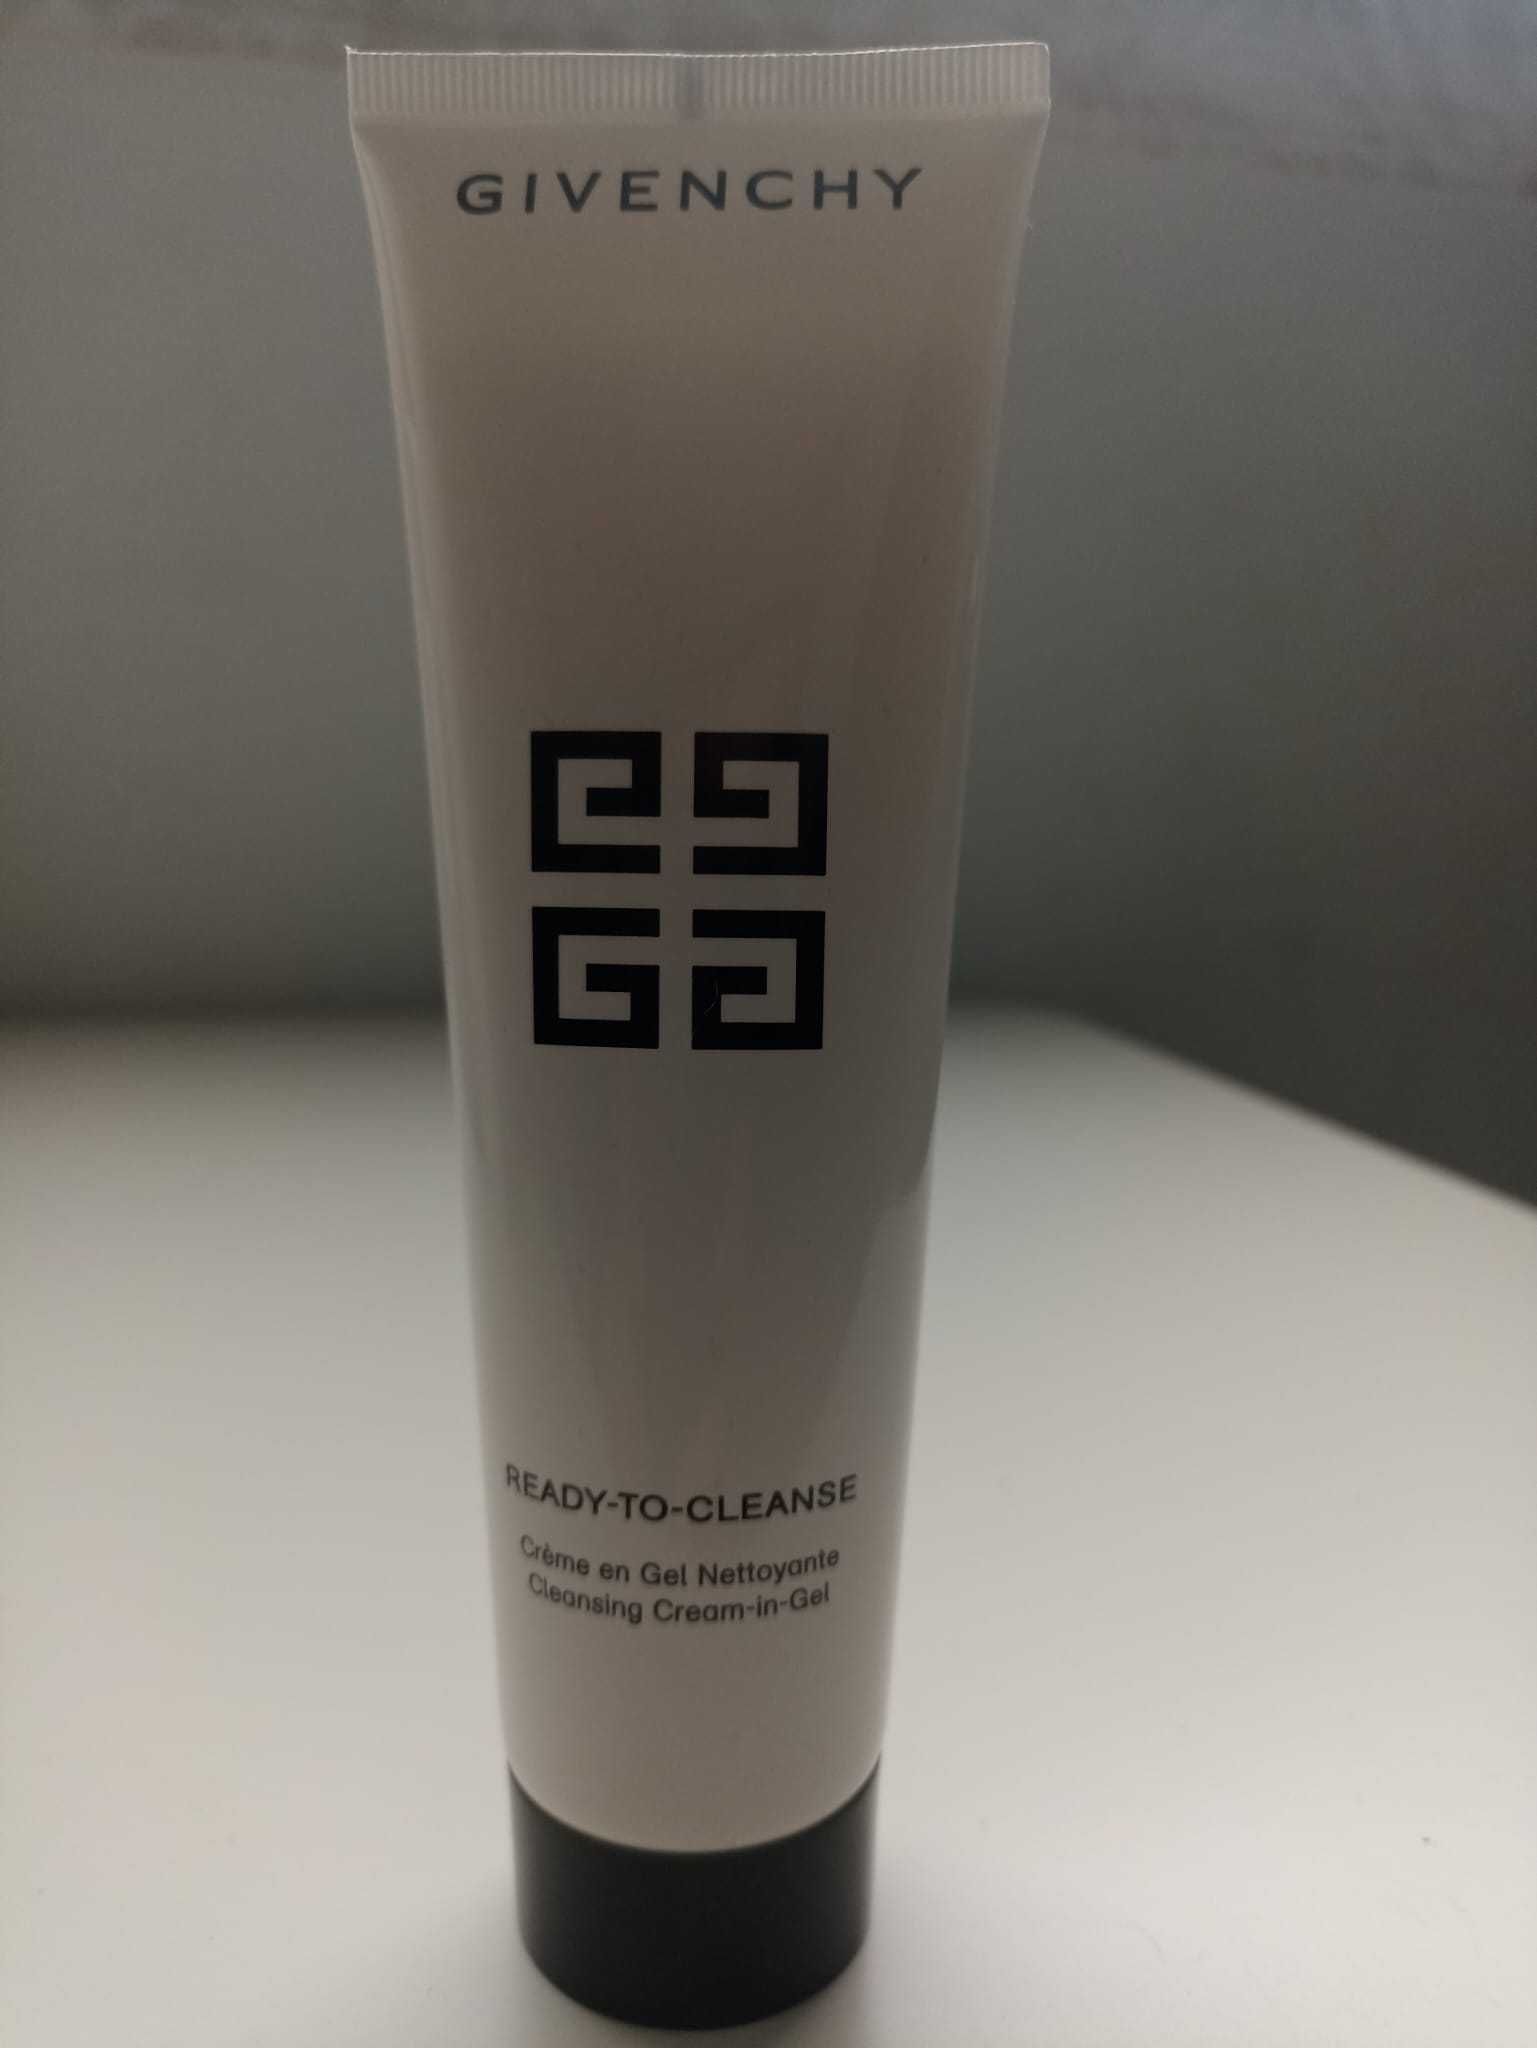 Givenchy Ready-To-Cleanse 150ml